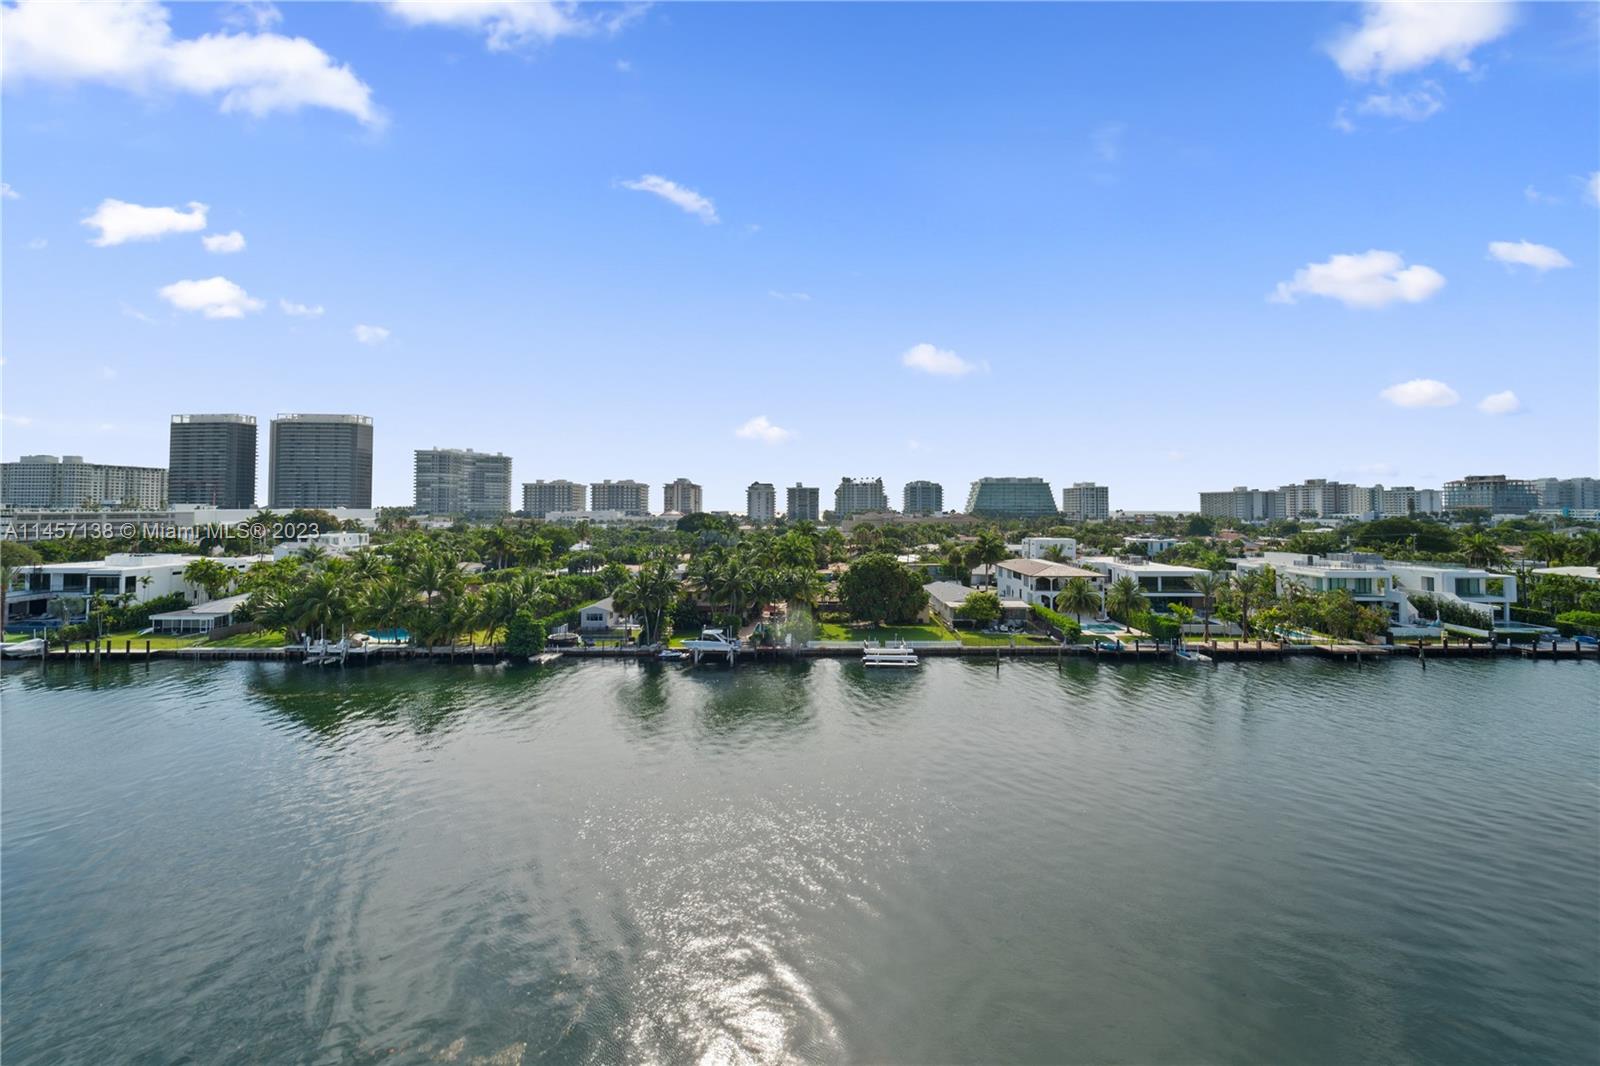 Watch some dolphins while sipping on your coffee from your private balcony with breathtaking water views. Unobstructed direct 180 degree views of the bay, canal and city along with a peek of the Atlantic ocean from this PH corner unit with two oversized in-suite bedrooms w/walk-in closets and 2.5 bathrooms. This 1,640Sq.Ft. unit features a unique blend of modern & traditional styles with immaculate original wood floors throughout, 12' ceilings, European eat-in kitchen, newer A/C unit and plenty of natural light. Sitting right on the Indian Creek canal, this boutique building offers a waterfront pool, only 4 units per floor and assigned parking. Walk to the beach, Bal Harbour shops, A-rated Ruth K. Broad Bay K-8 Center, restaurants, supermarkets and much more.